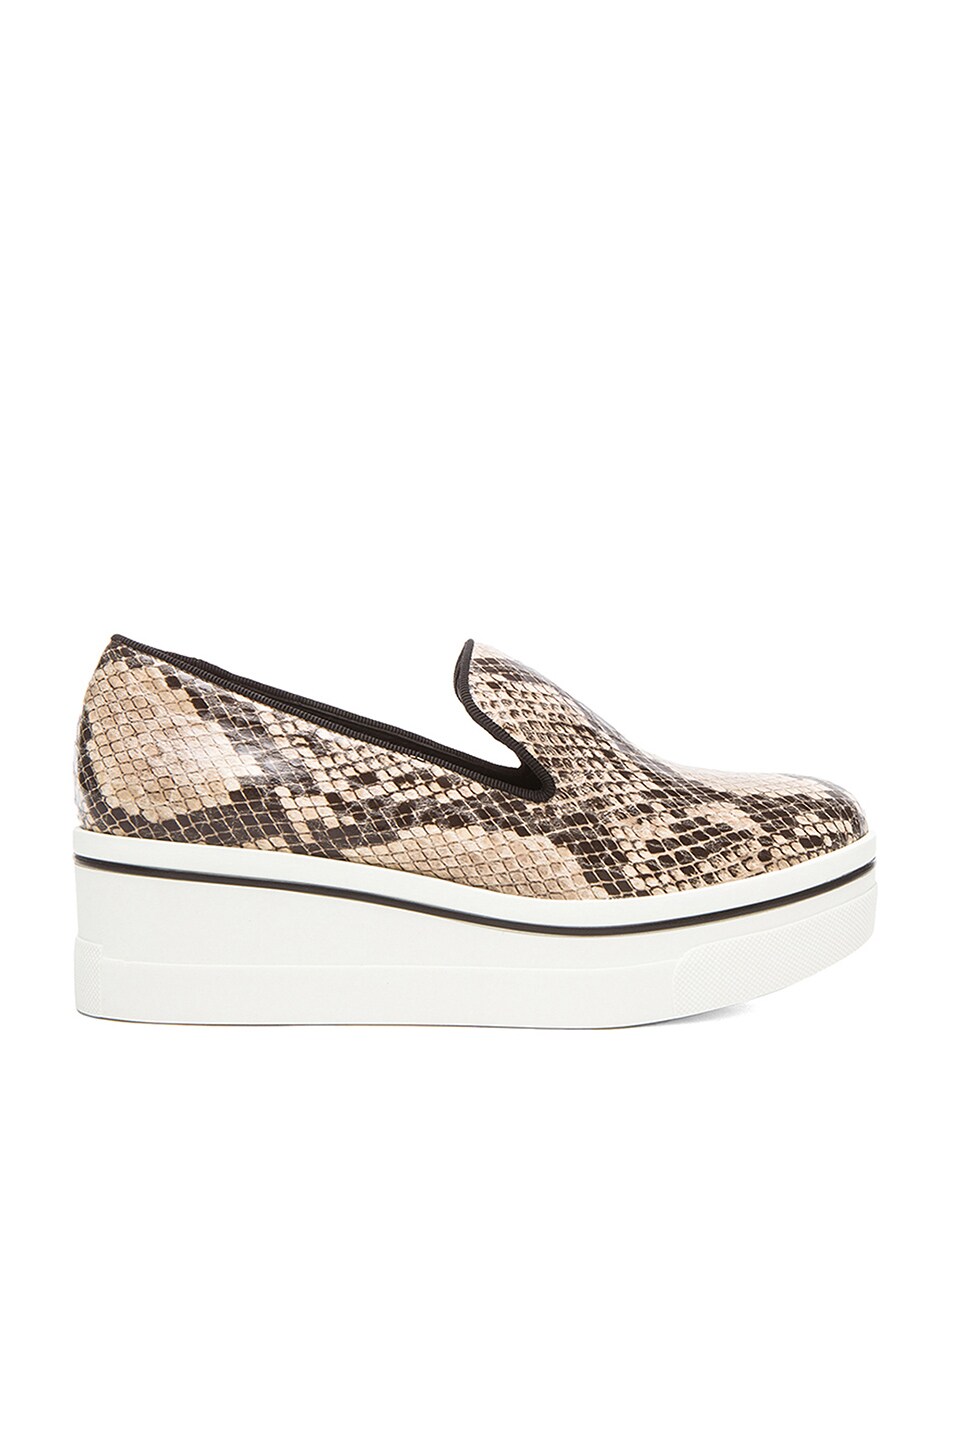 Image 1 of Stella McCartney Python Embossed Faux Leather Creepers in Dust & Black